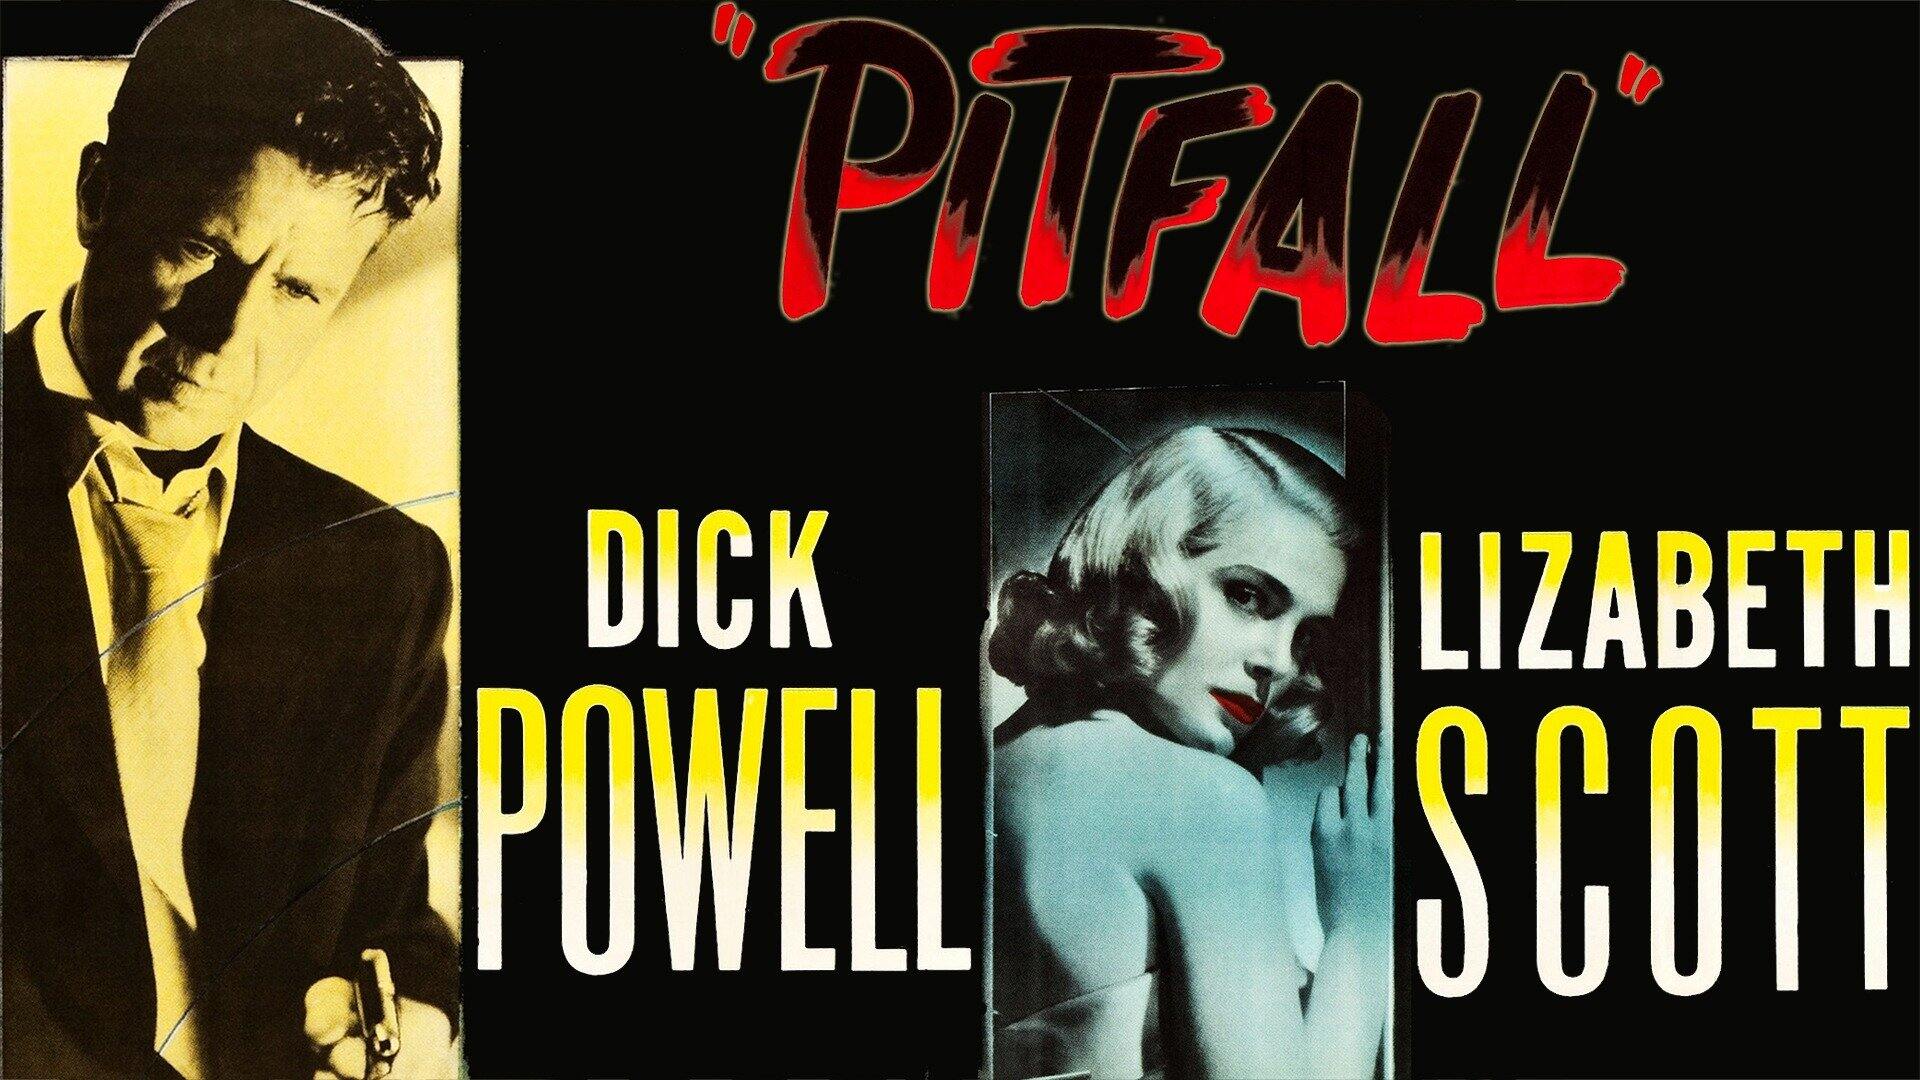 38-facts-about-the-movie-pitfall